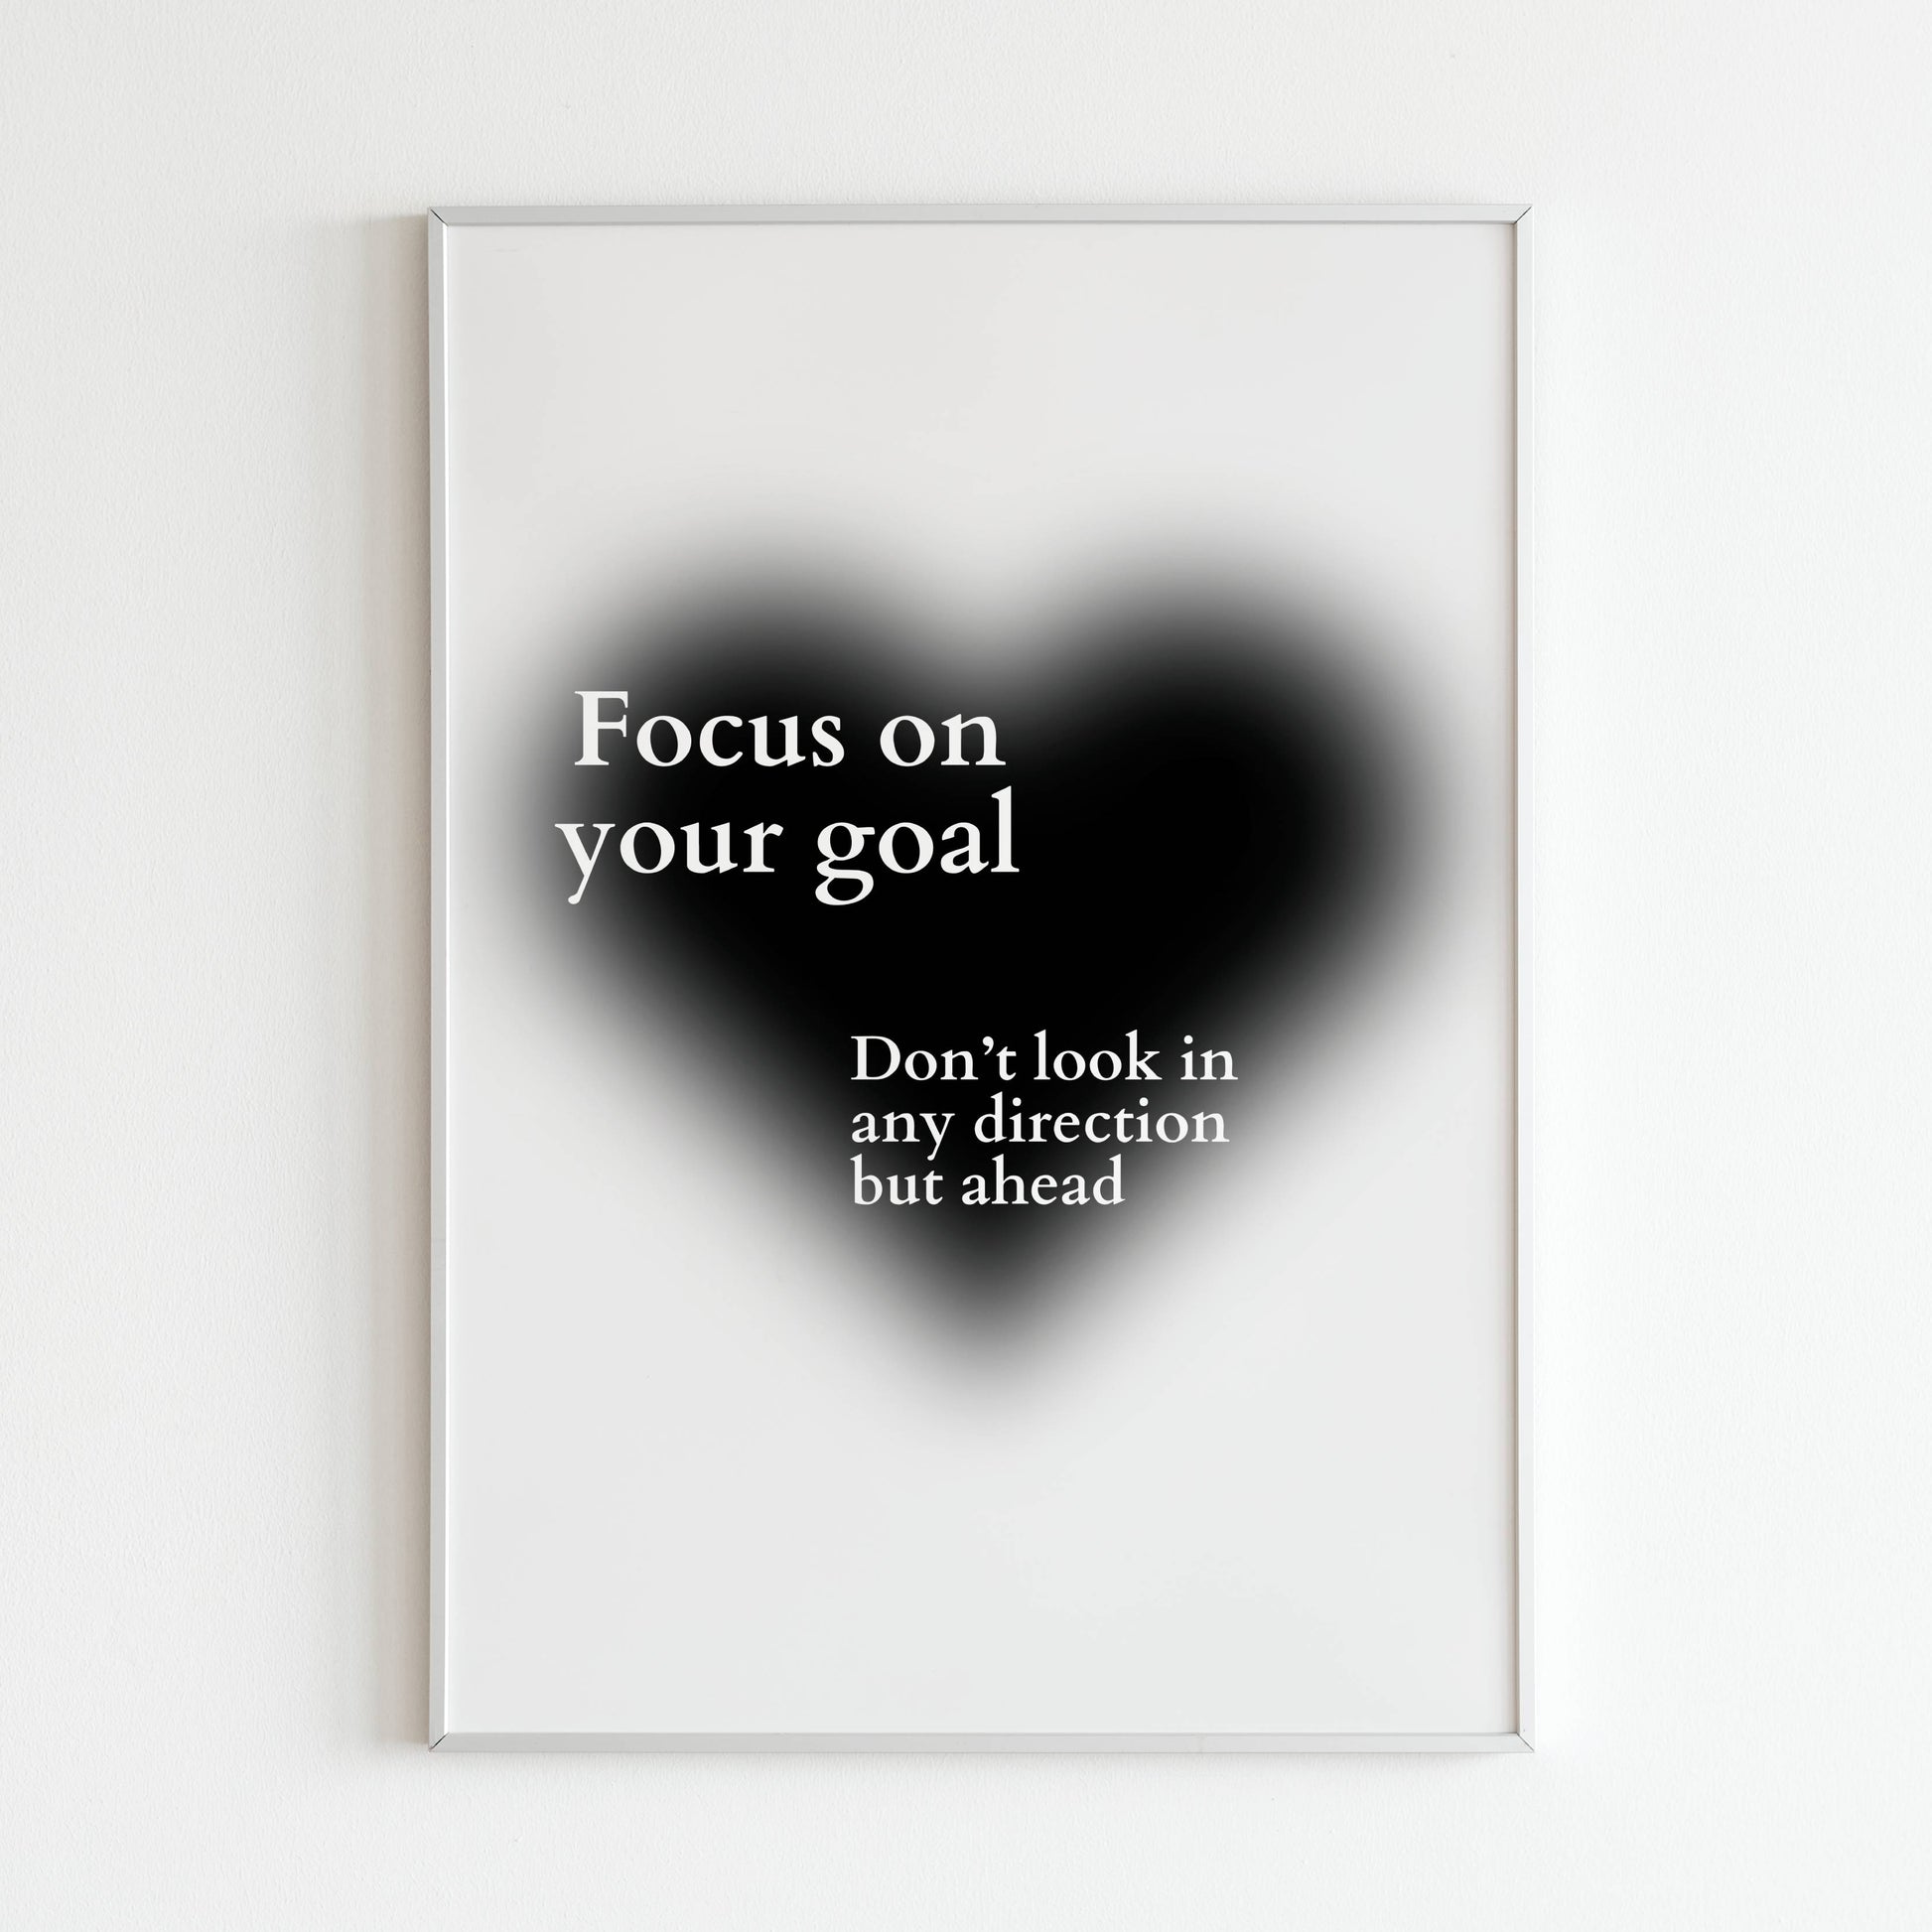 Downloadable "Focus on Your Goal" wall art for a reminder to stay focused.